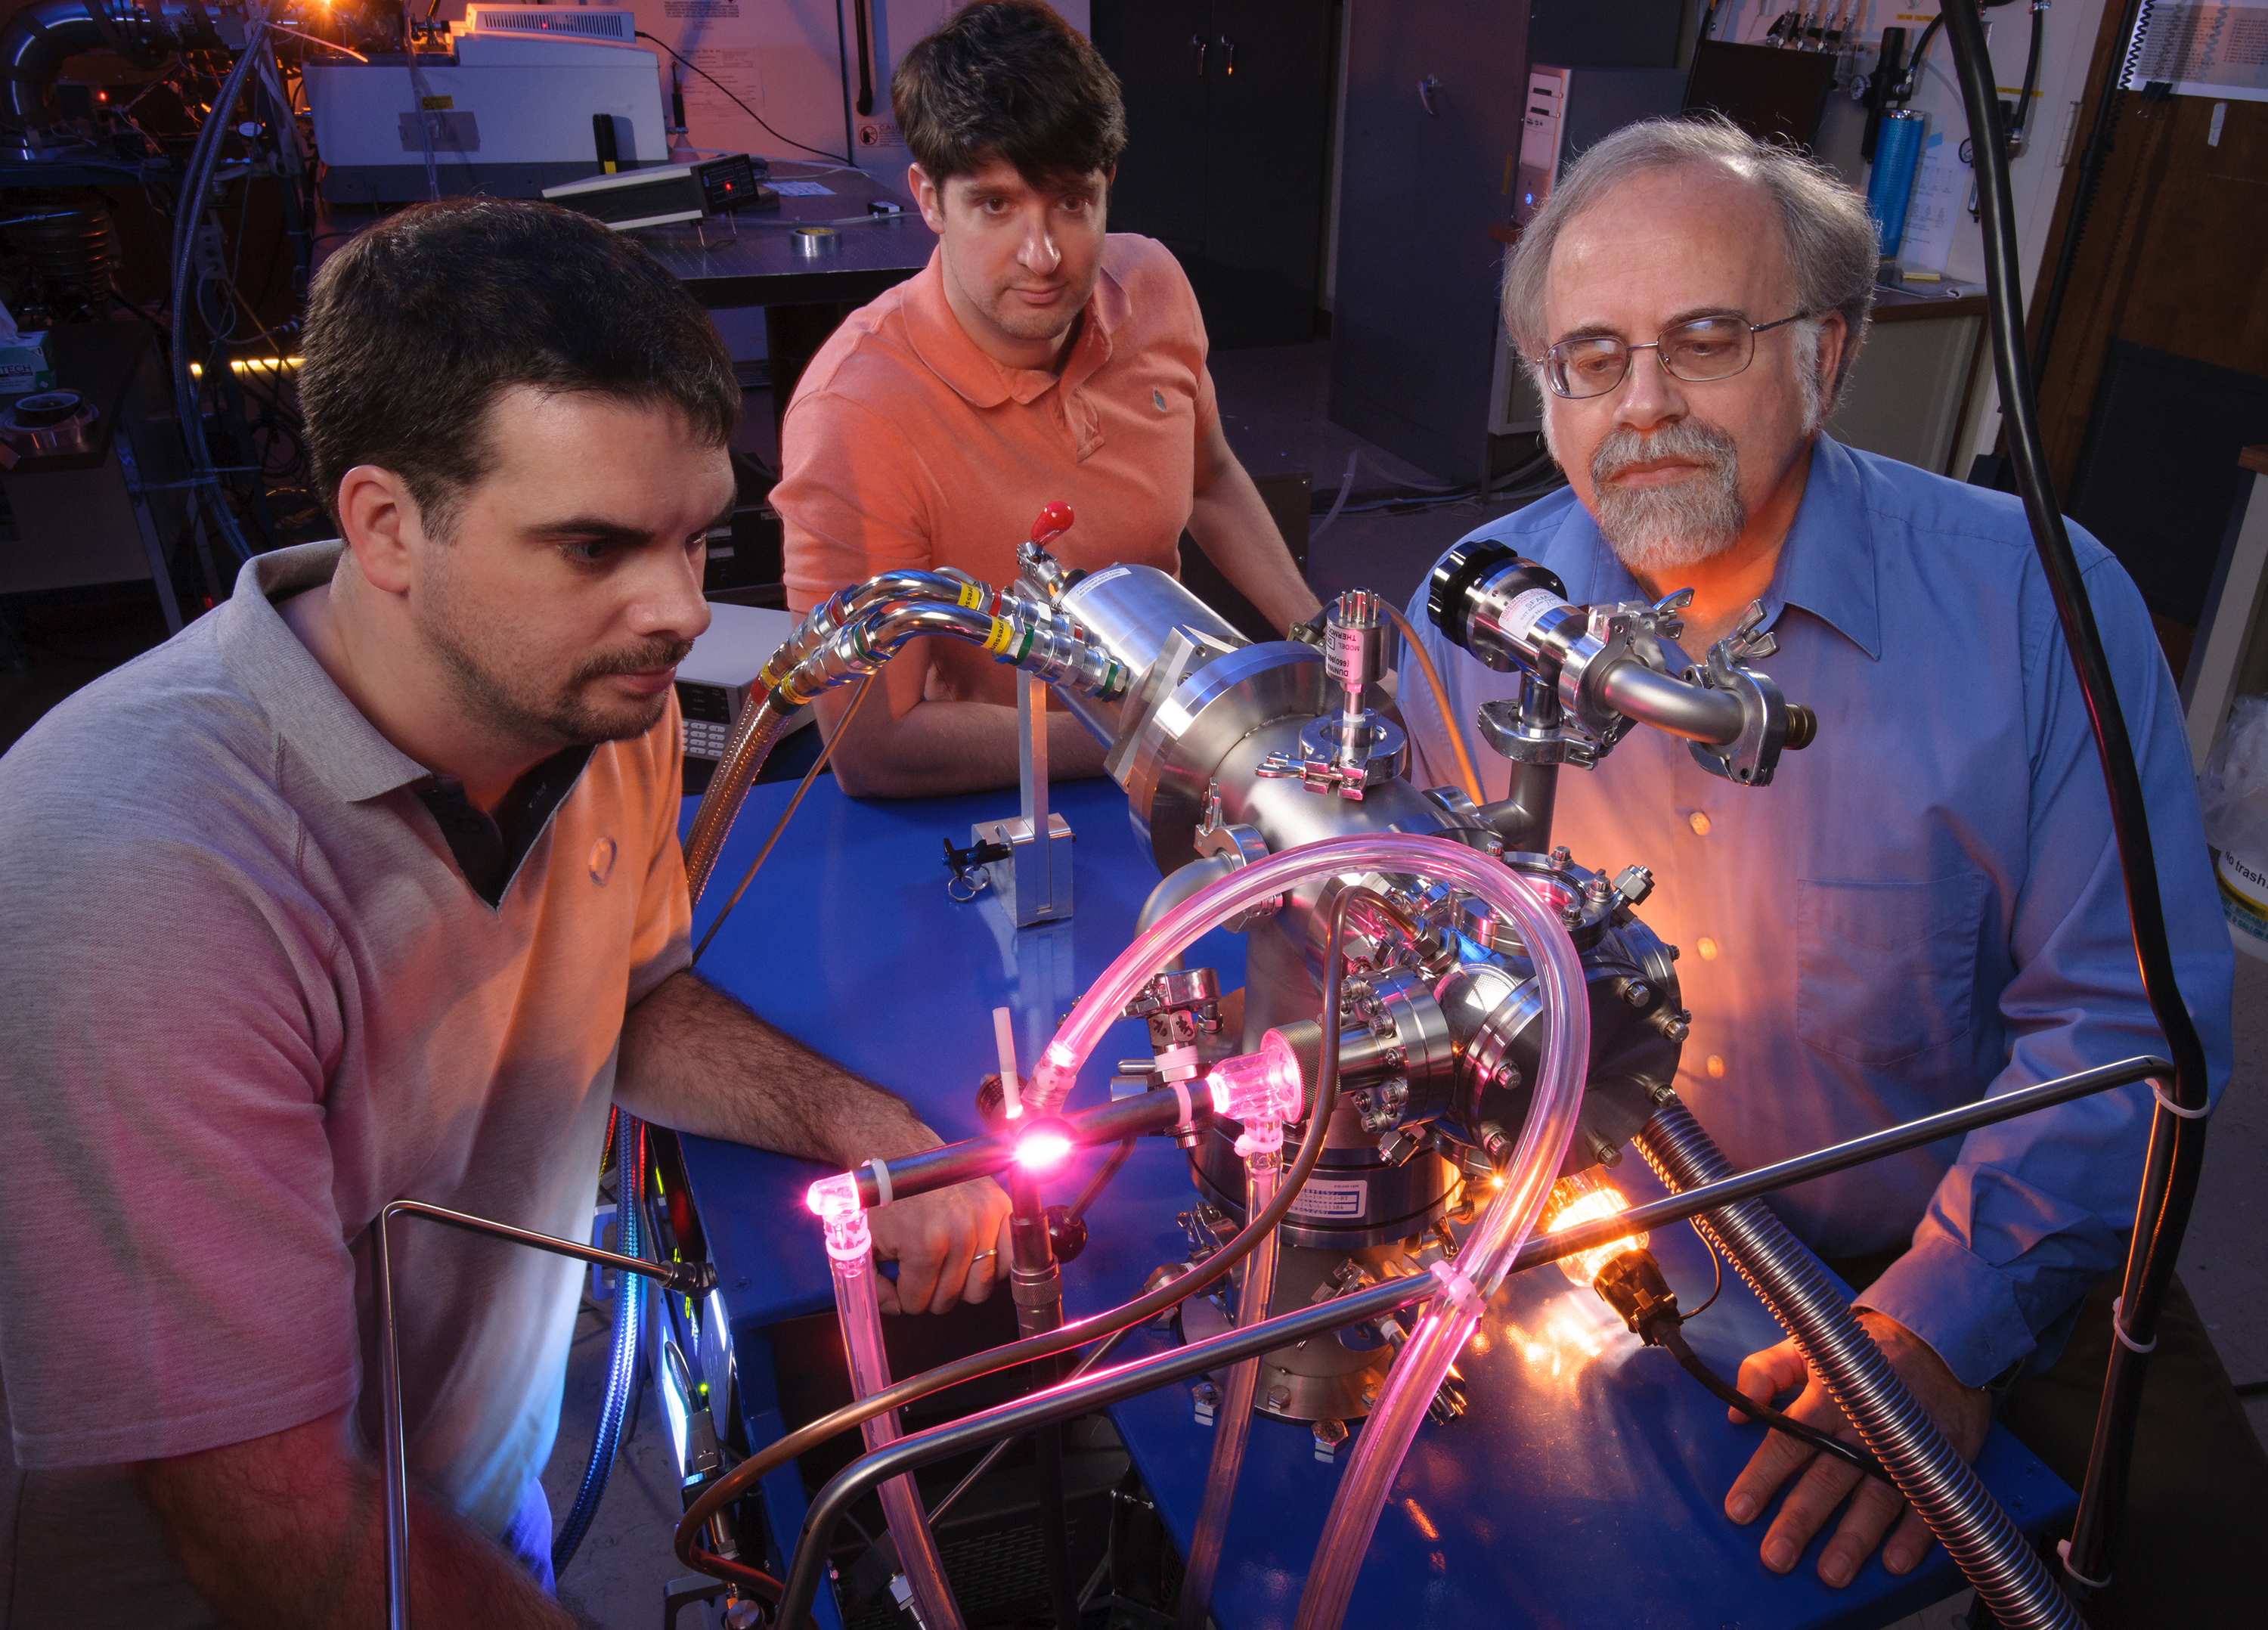 In the Astrophysics and Astrochemistry Lab at NASA's Ames Research Center, researchers Michel Nuevo, Christopher Materese, and Scott Sandford study the cosmic origins of molecules that are important to life. Credits: NASA/Ames Research Center/Dominic Hart Image credit: None